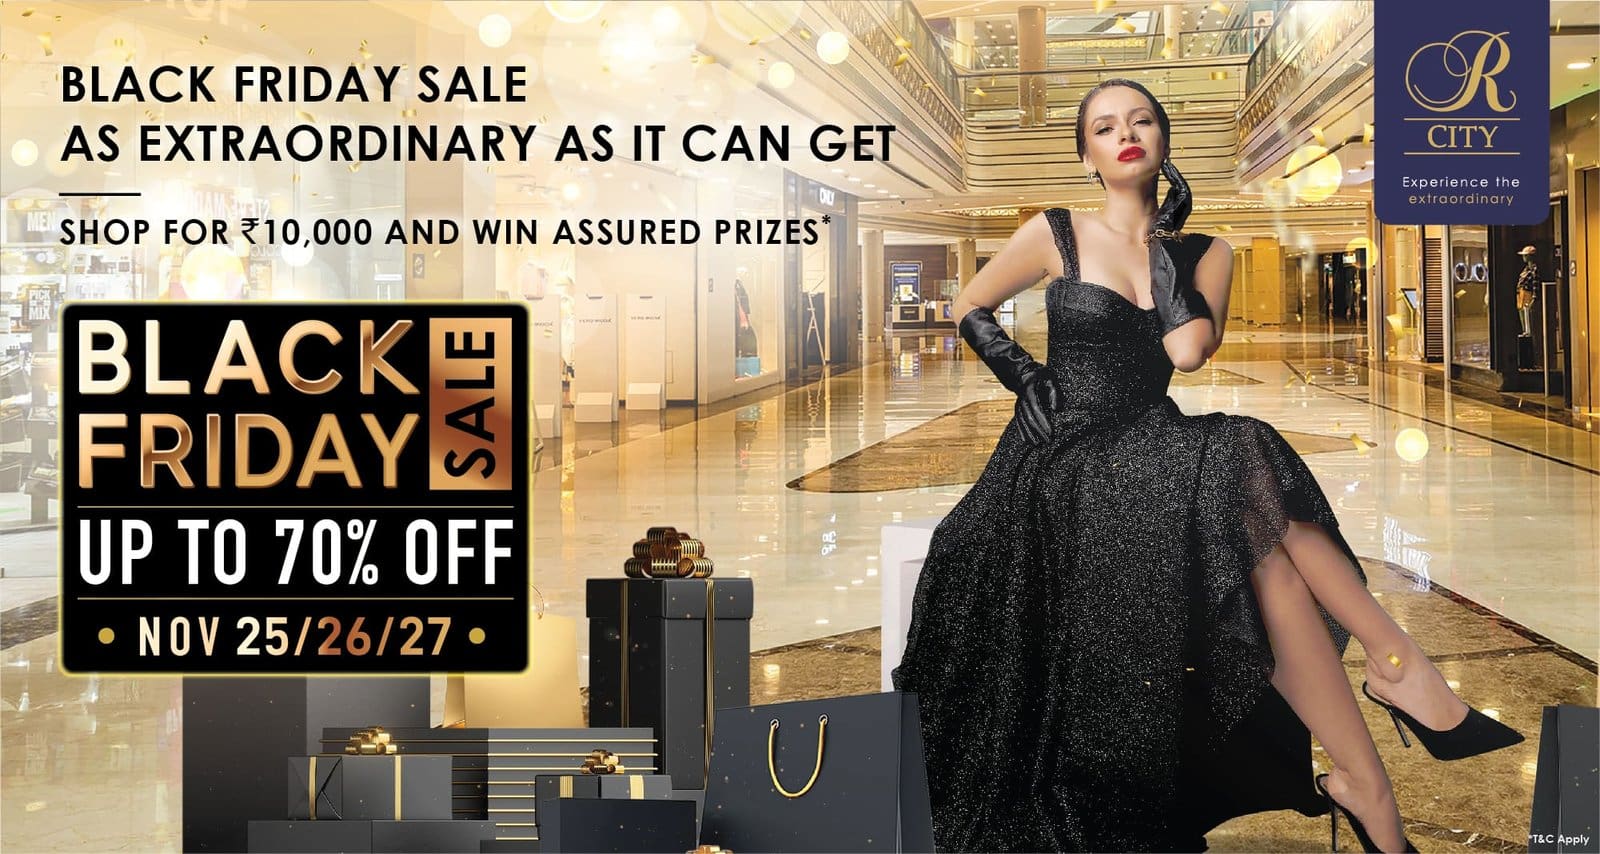 THIS NOVEMBER, R CITY LAUNCHES ITS MASSIVE BLACK FRIDAY SALE WITH ENTICING PRICES.